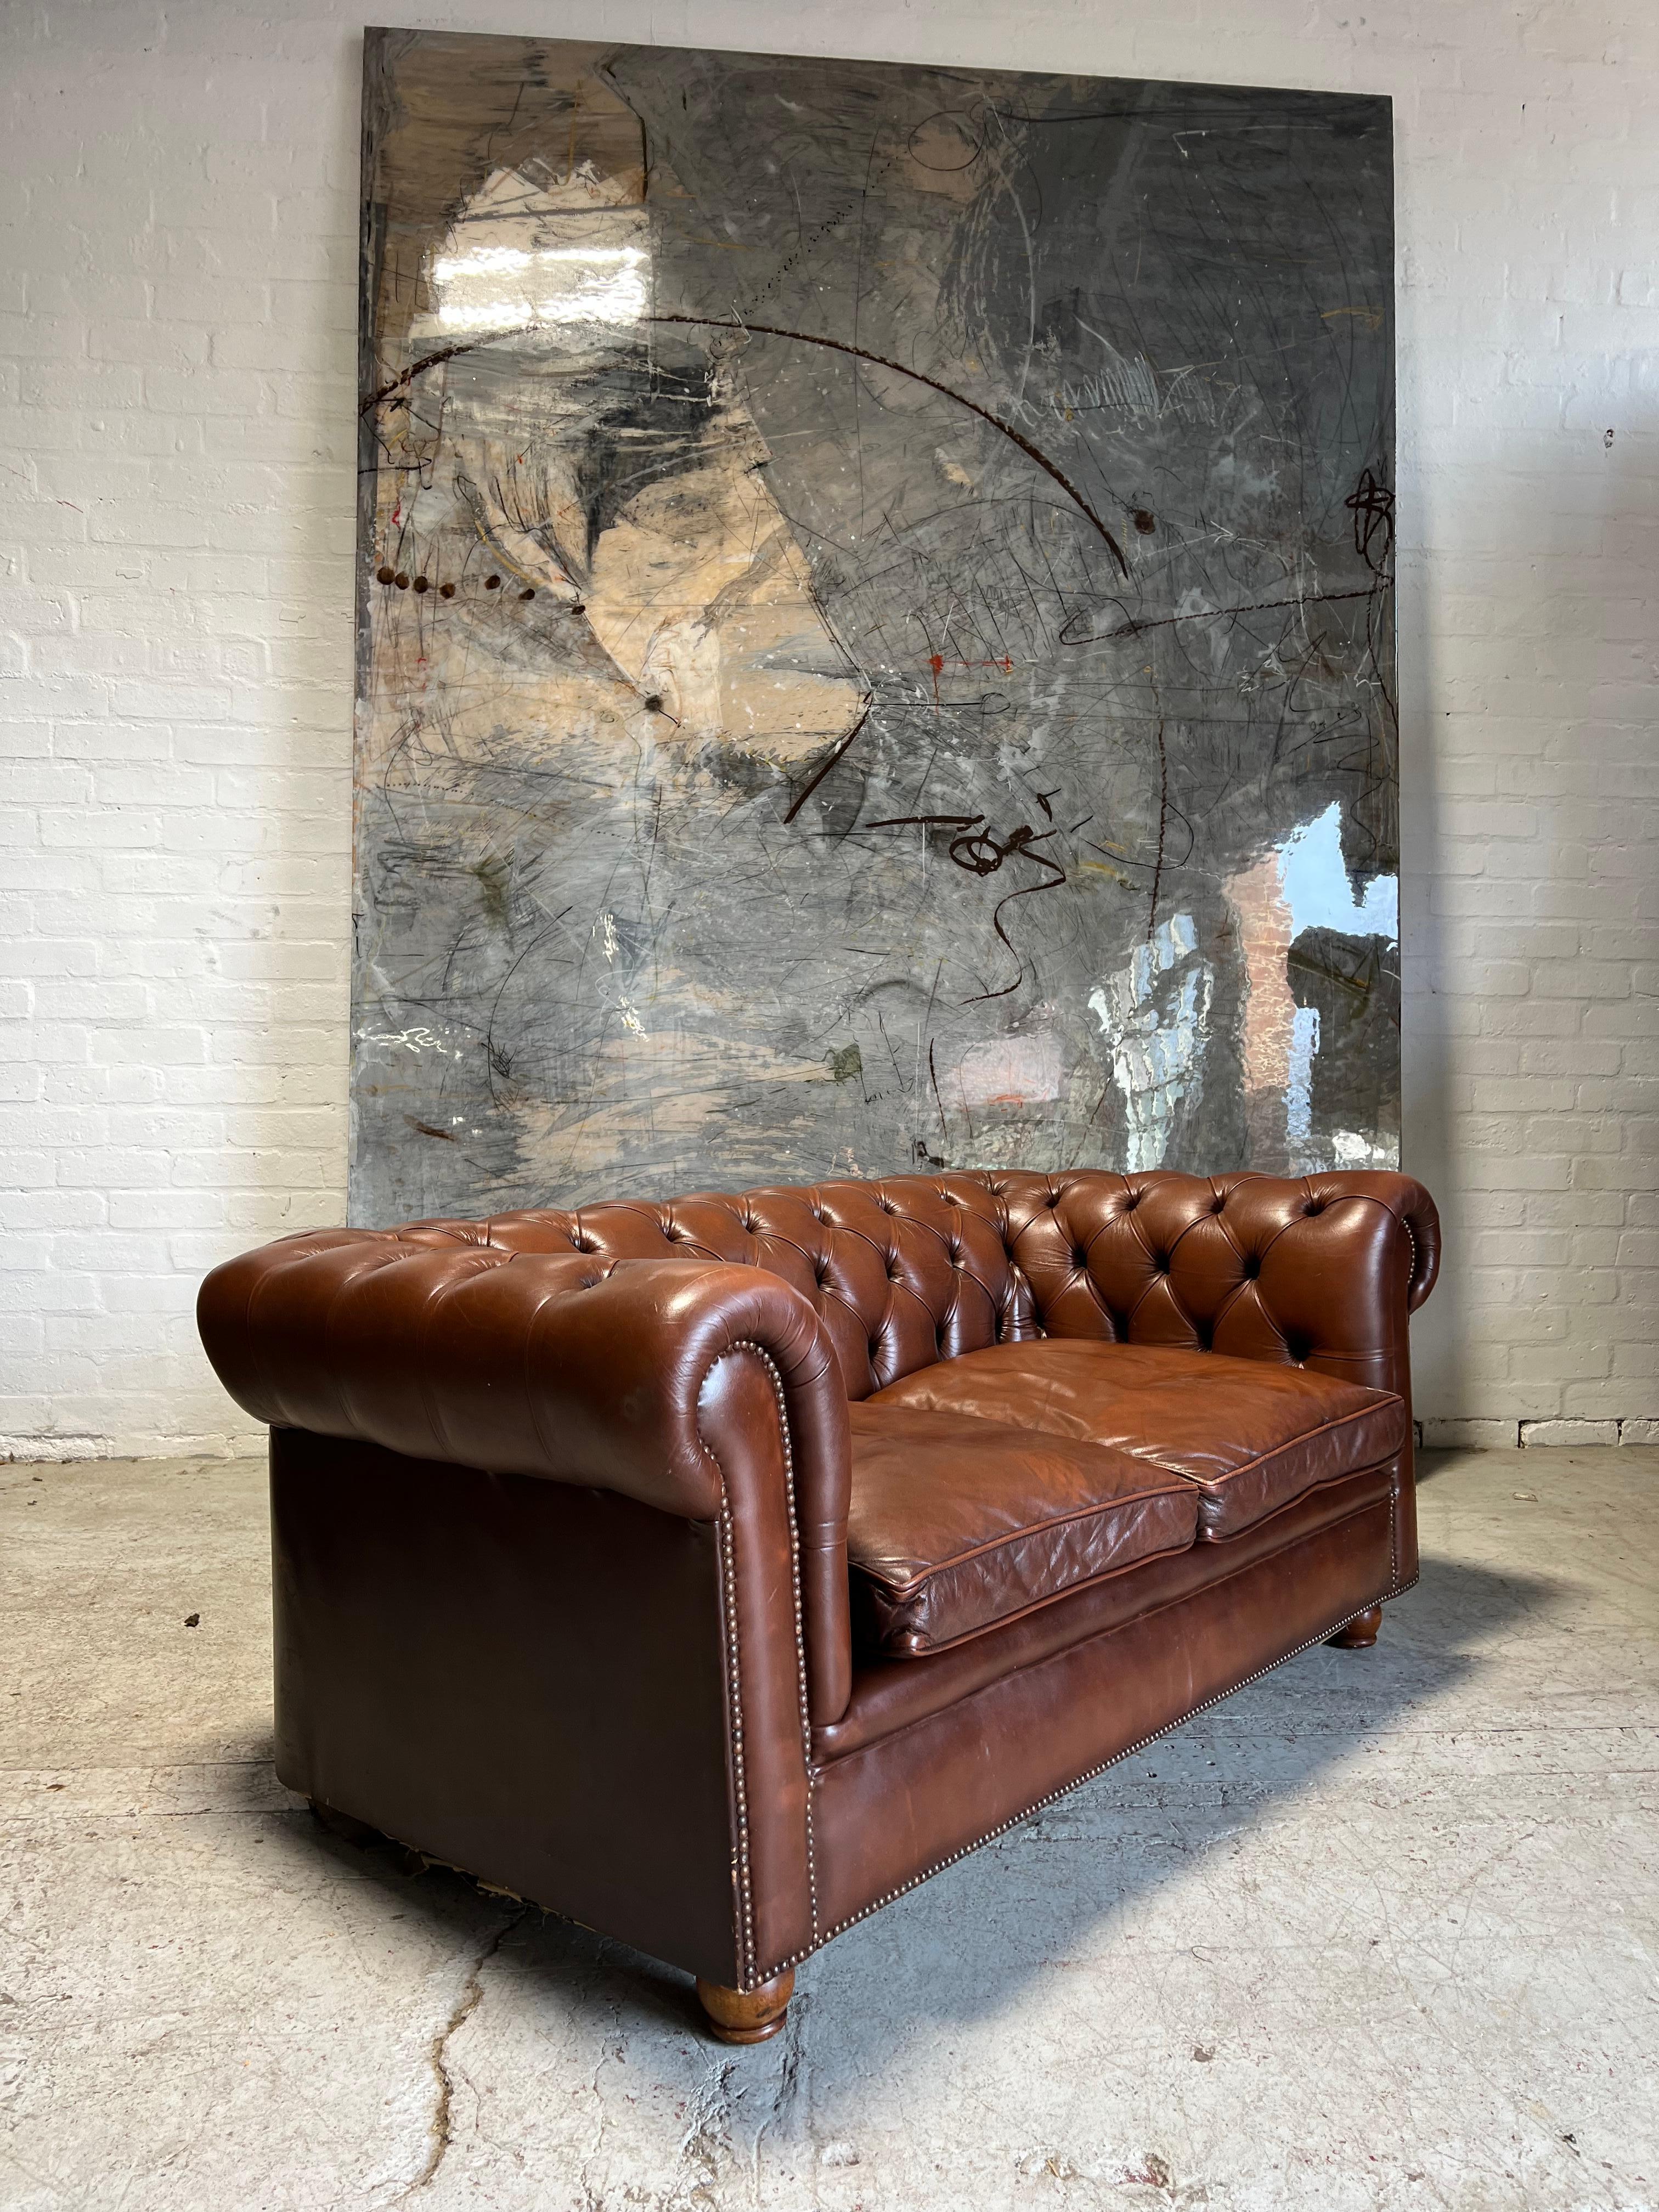 We were very fortunate to acquire a full collection of pieces from a beautiful country house on the south coast.

The full collection was purchased approximately 50 years ago and consists of the following:-

Generous 3 seat sofa 210cm - £2,699

3 x